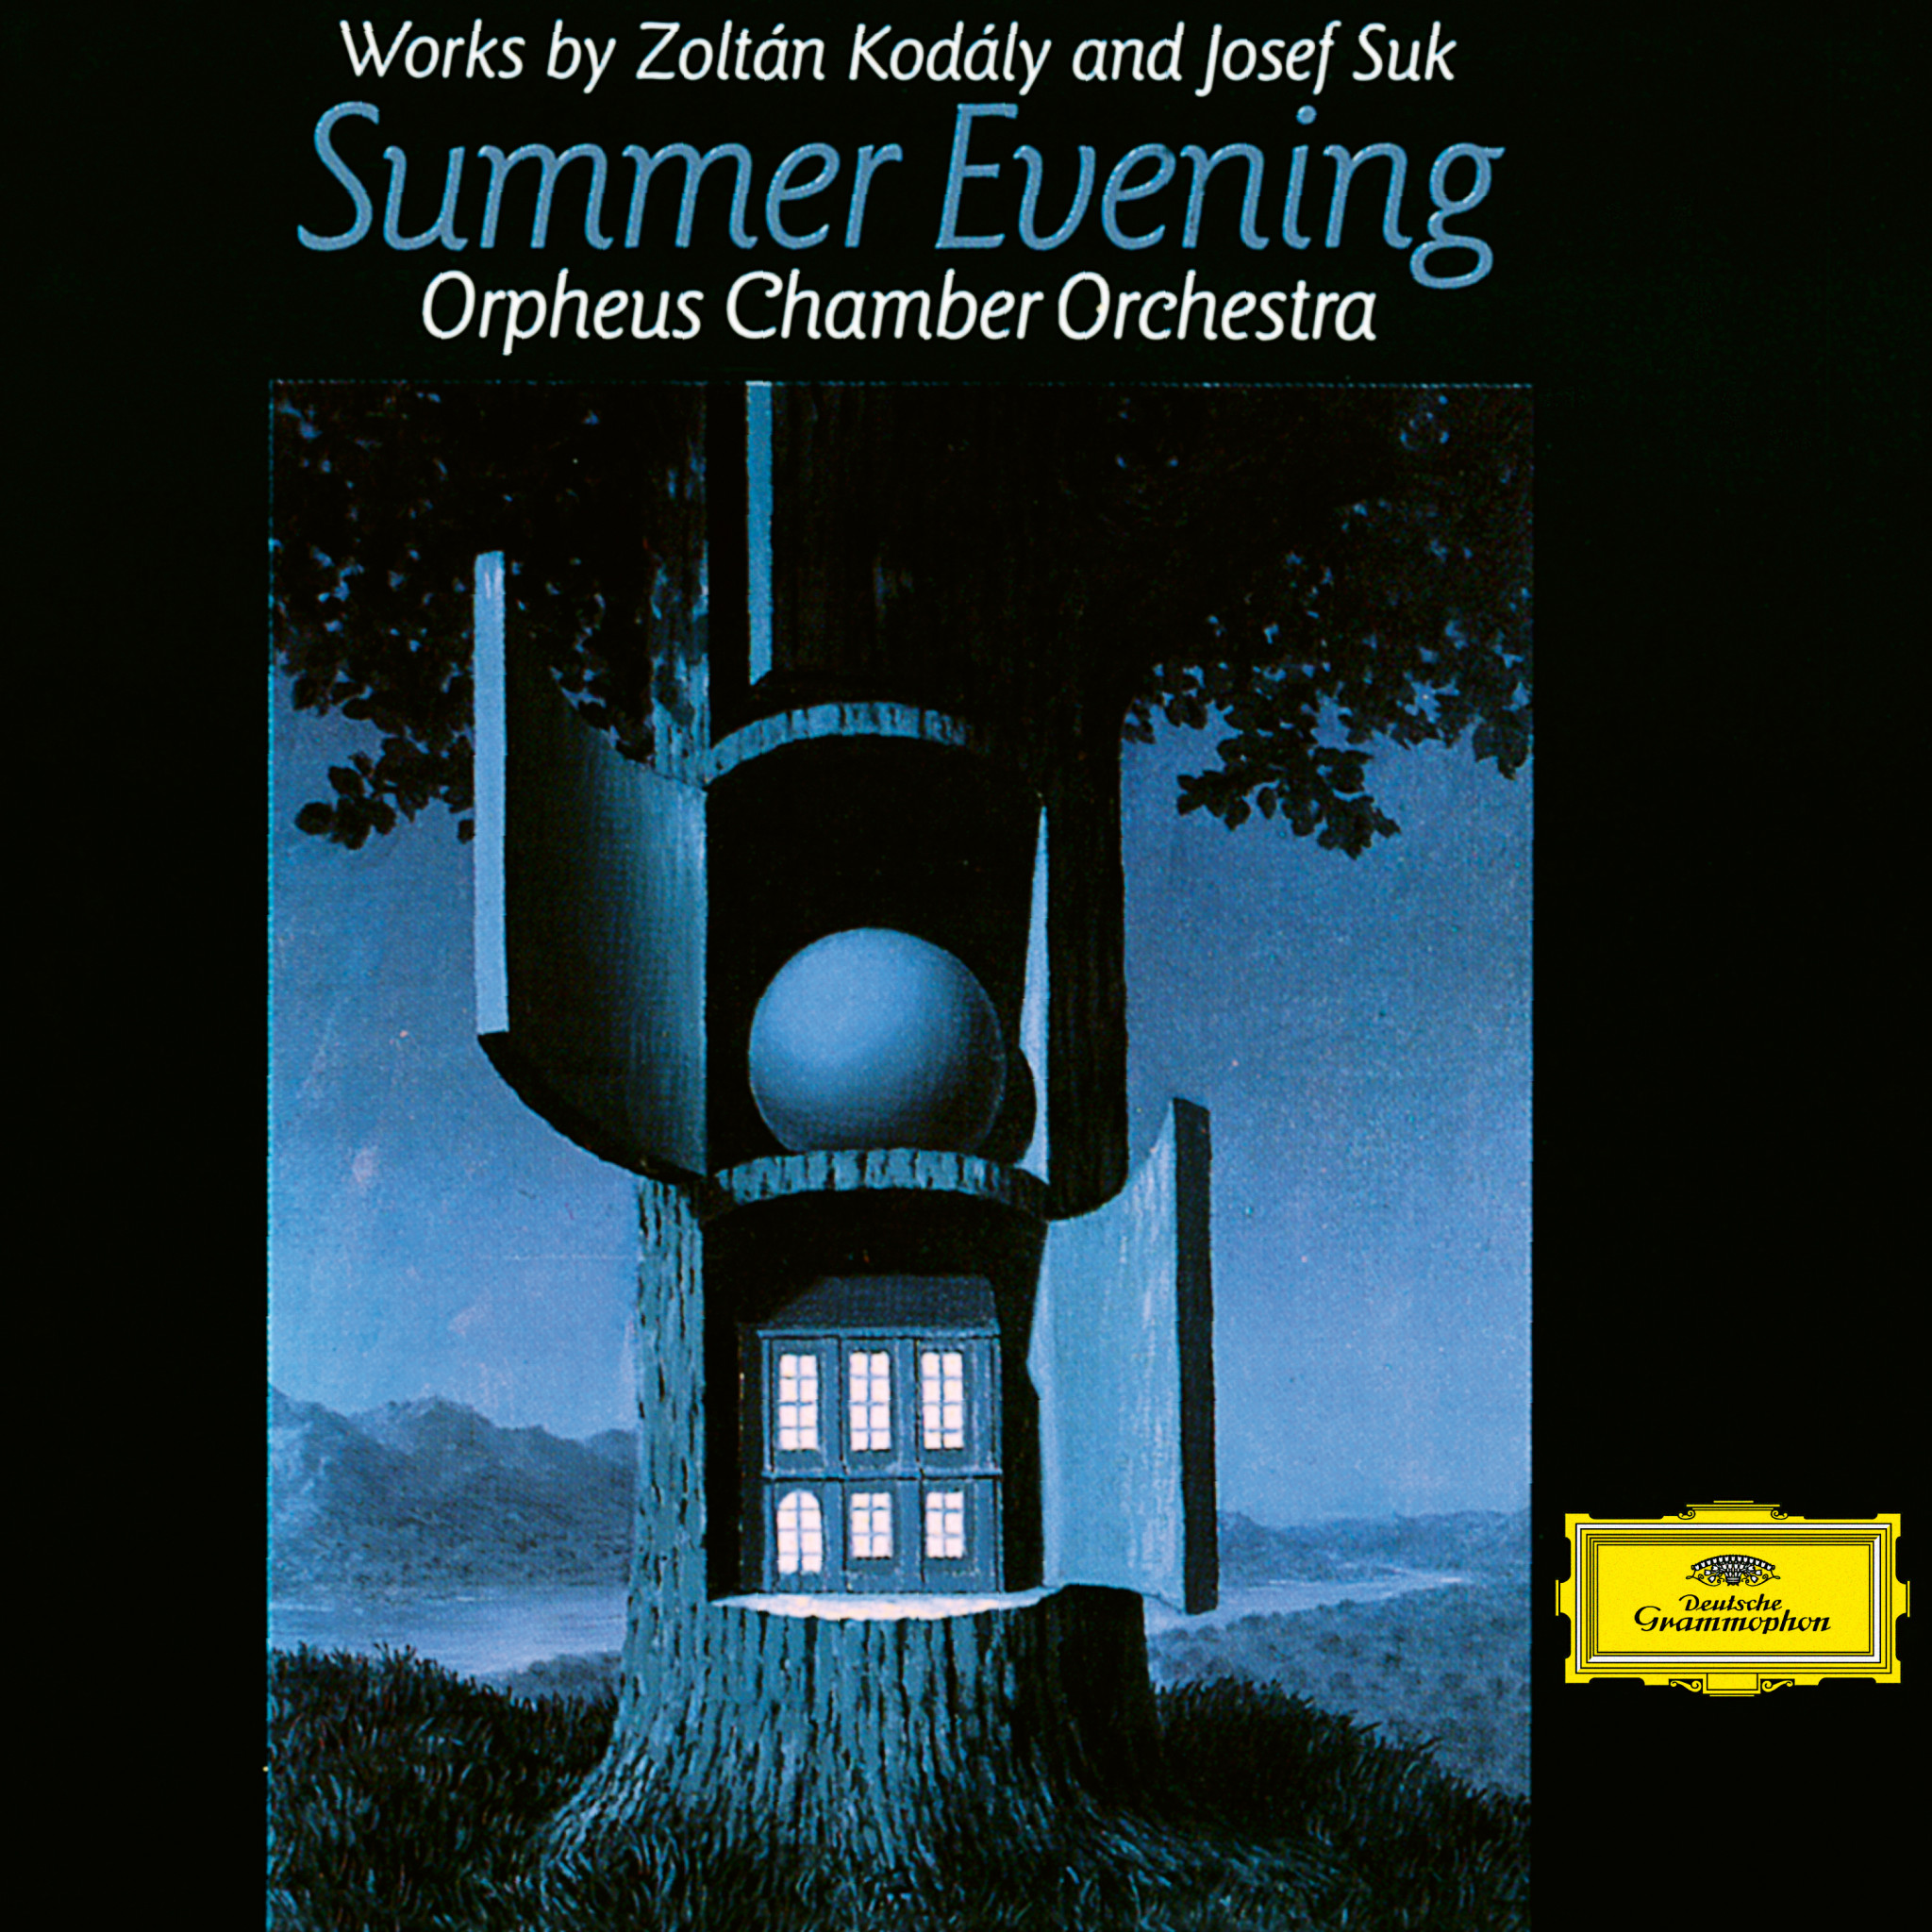 Orpheus Chamber Orchestra - Kodály: Hungarian Rondo, Summer Evening; Suk: Serenade for Strings in E-Flat Major, Op. 6 eAlbum Cover